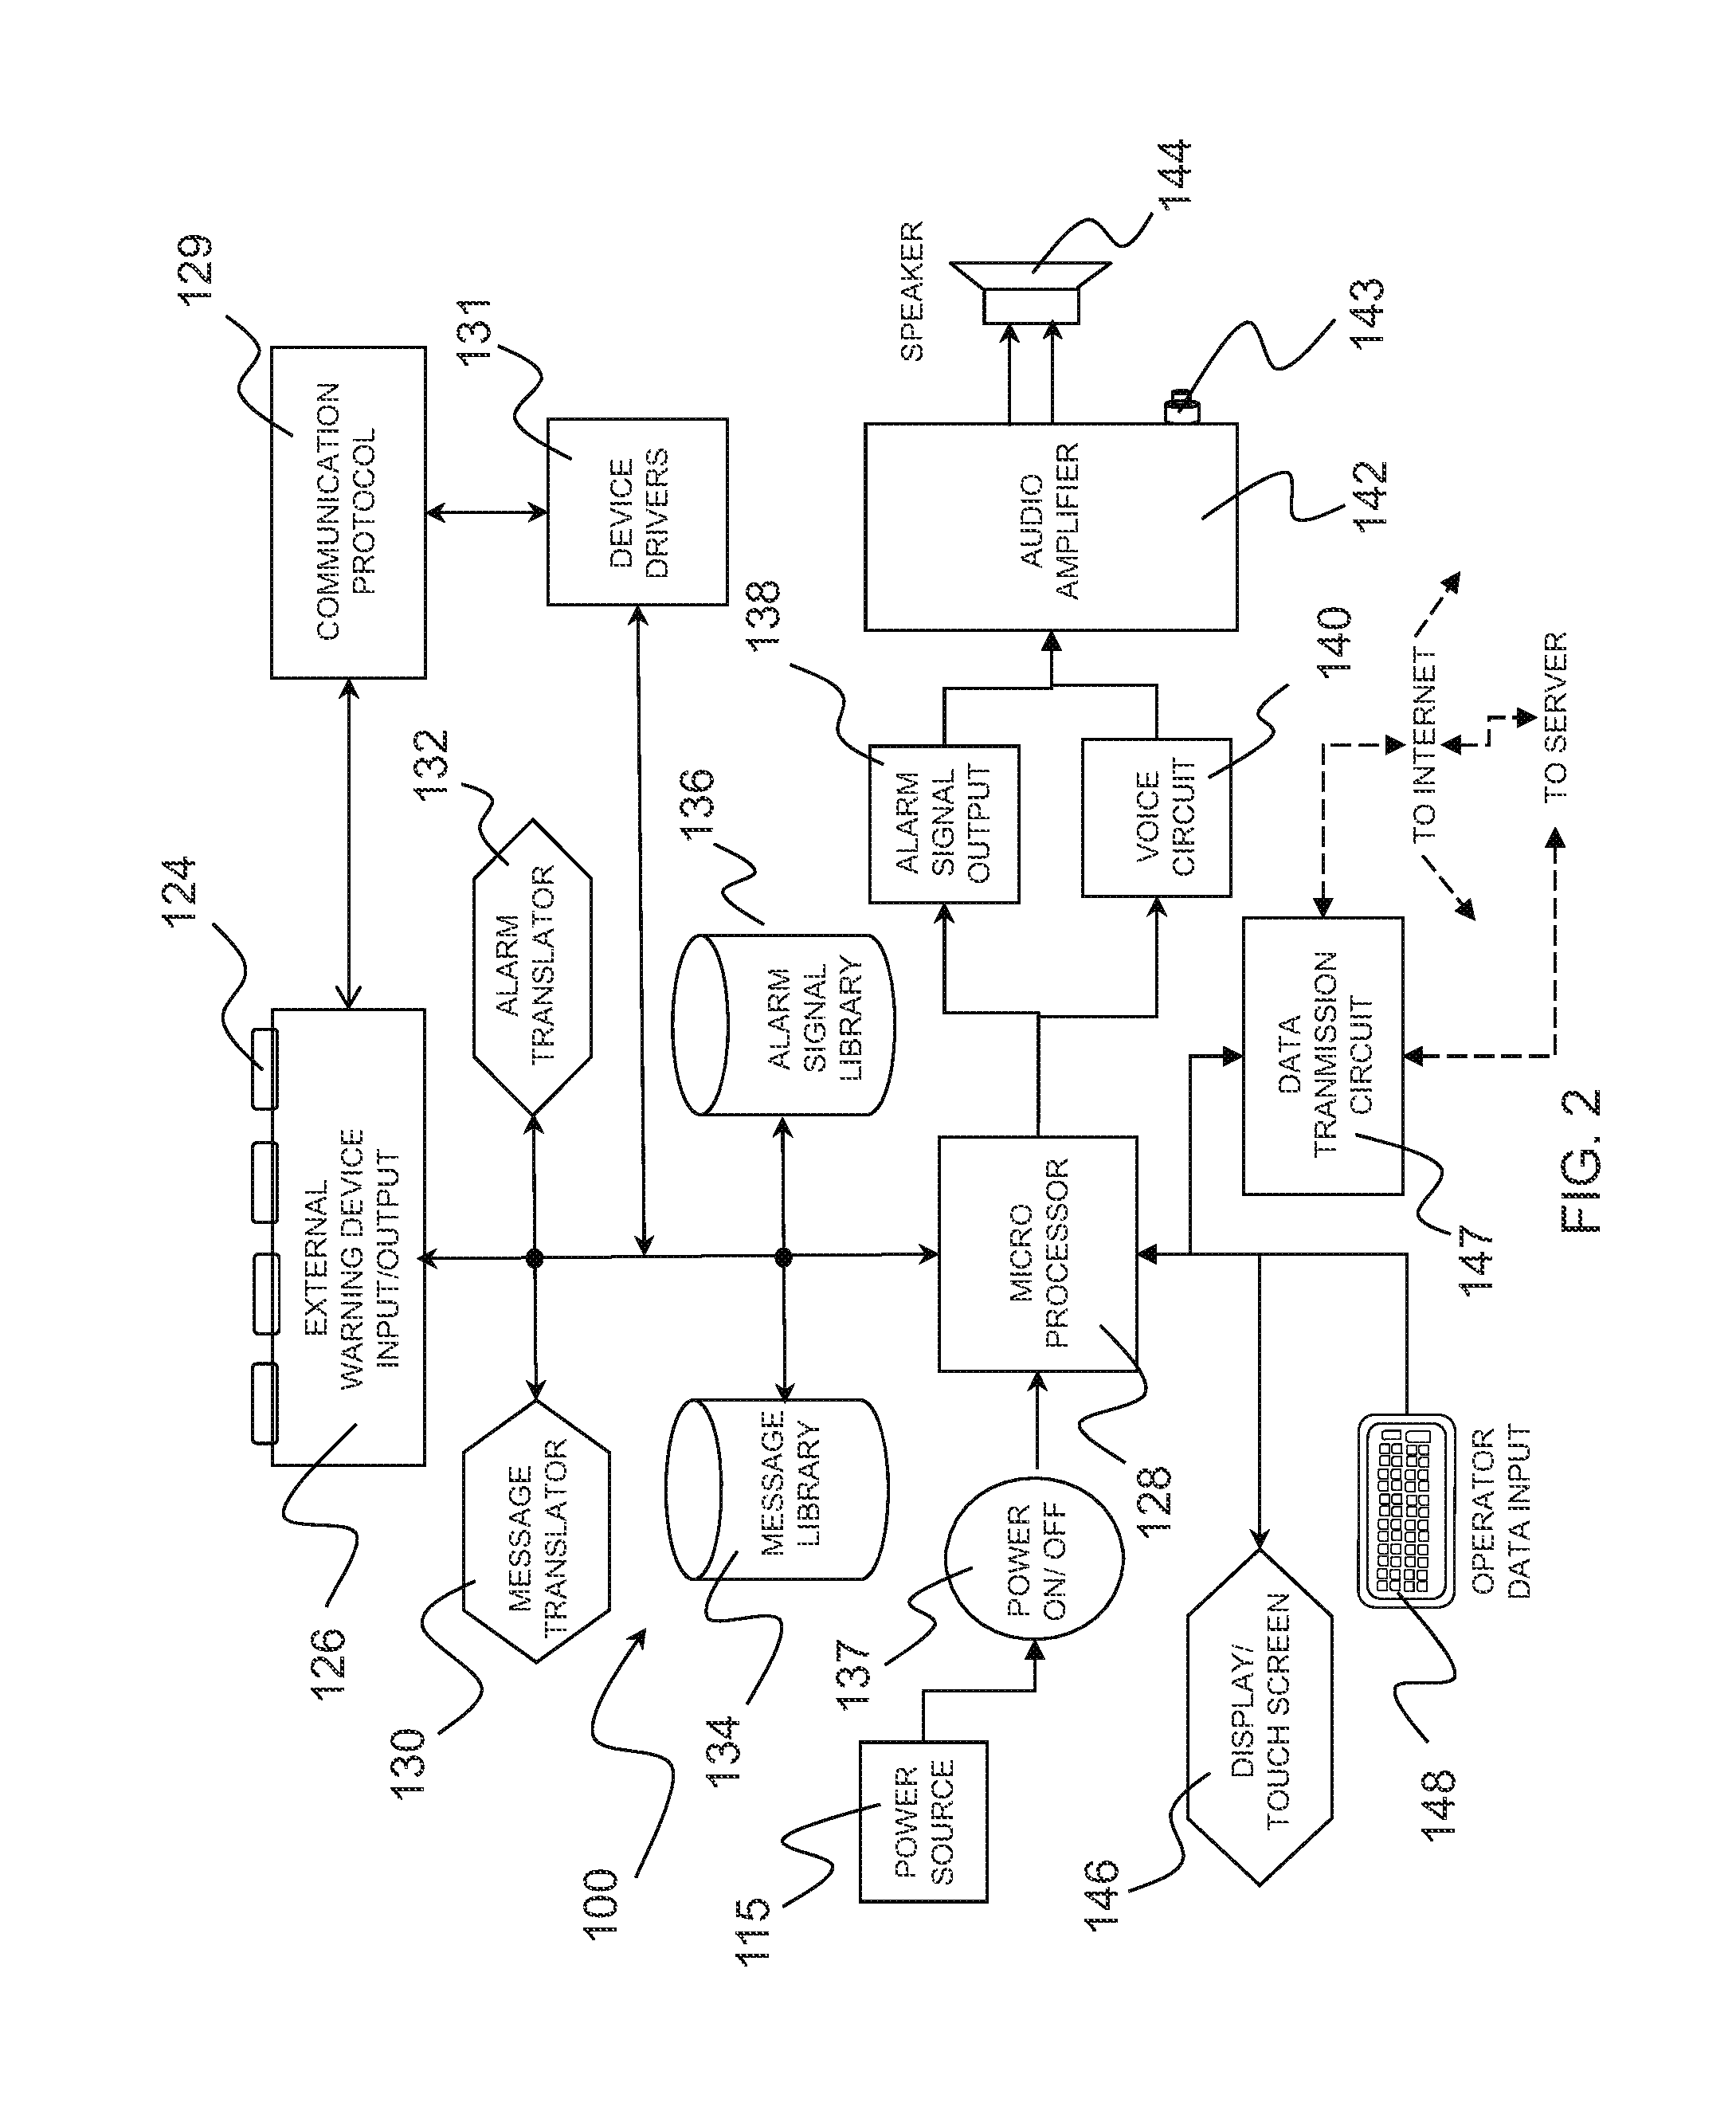 Warning and message delivery and logging system utilizable in the monitoring of fall arresting and prevention devices and method of same